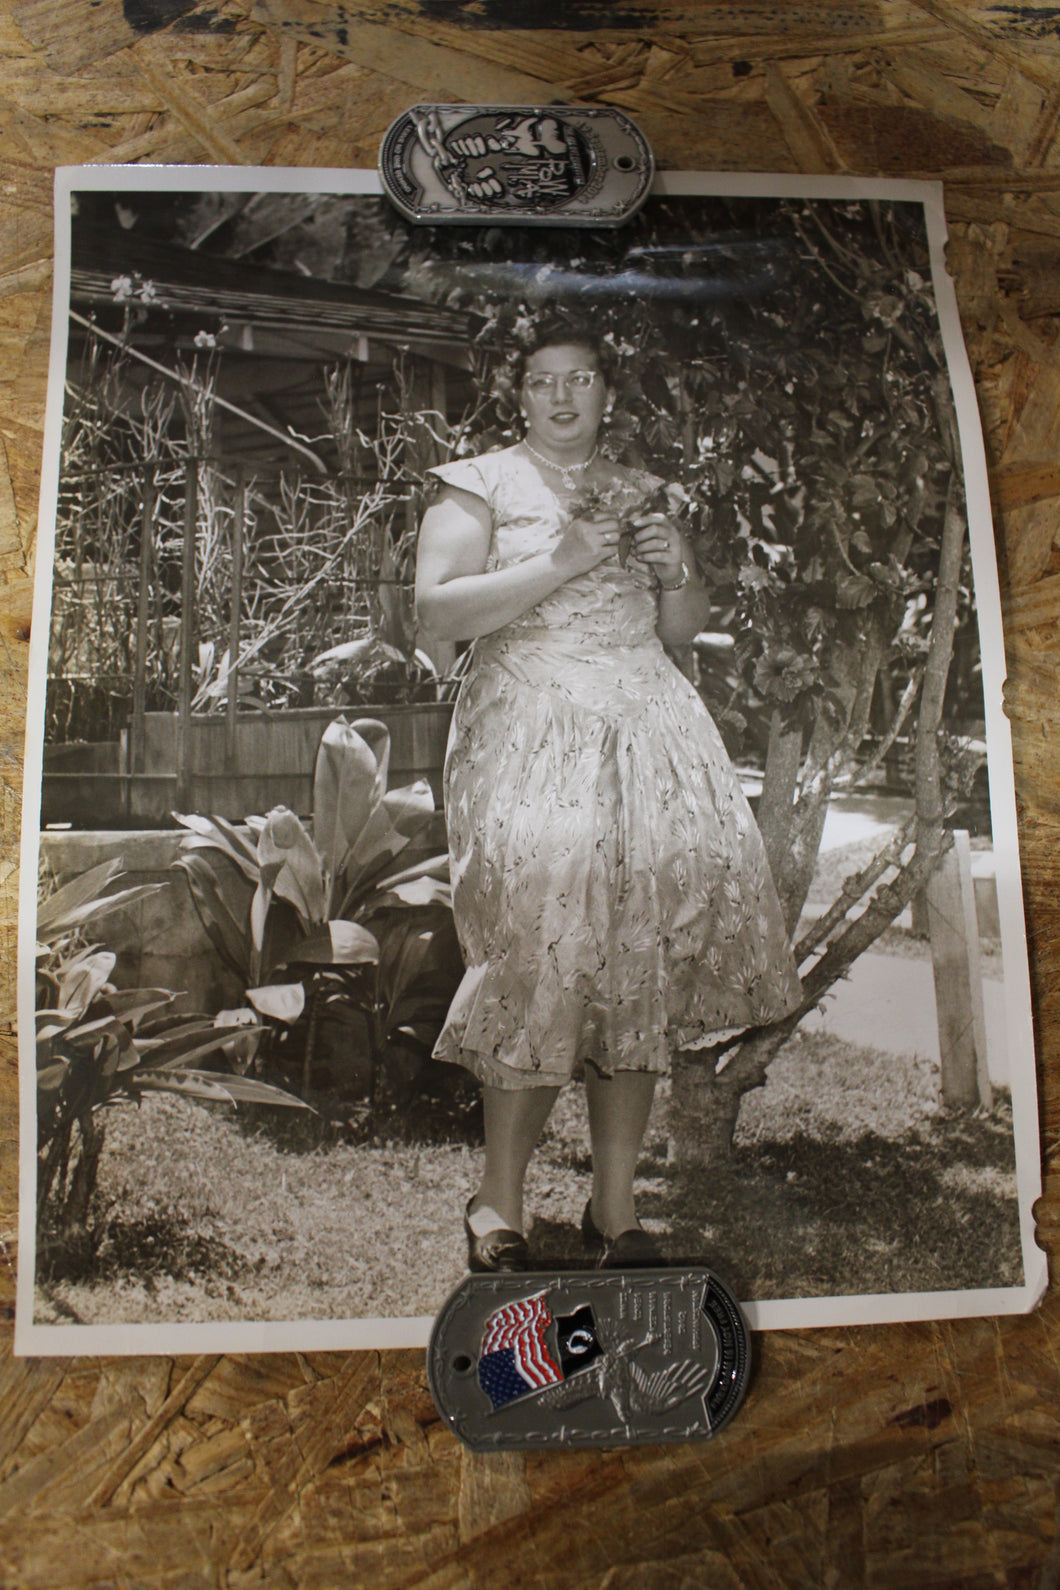 Vintage Authentic and Original Photo Woman Posing In Garden -Used